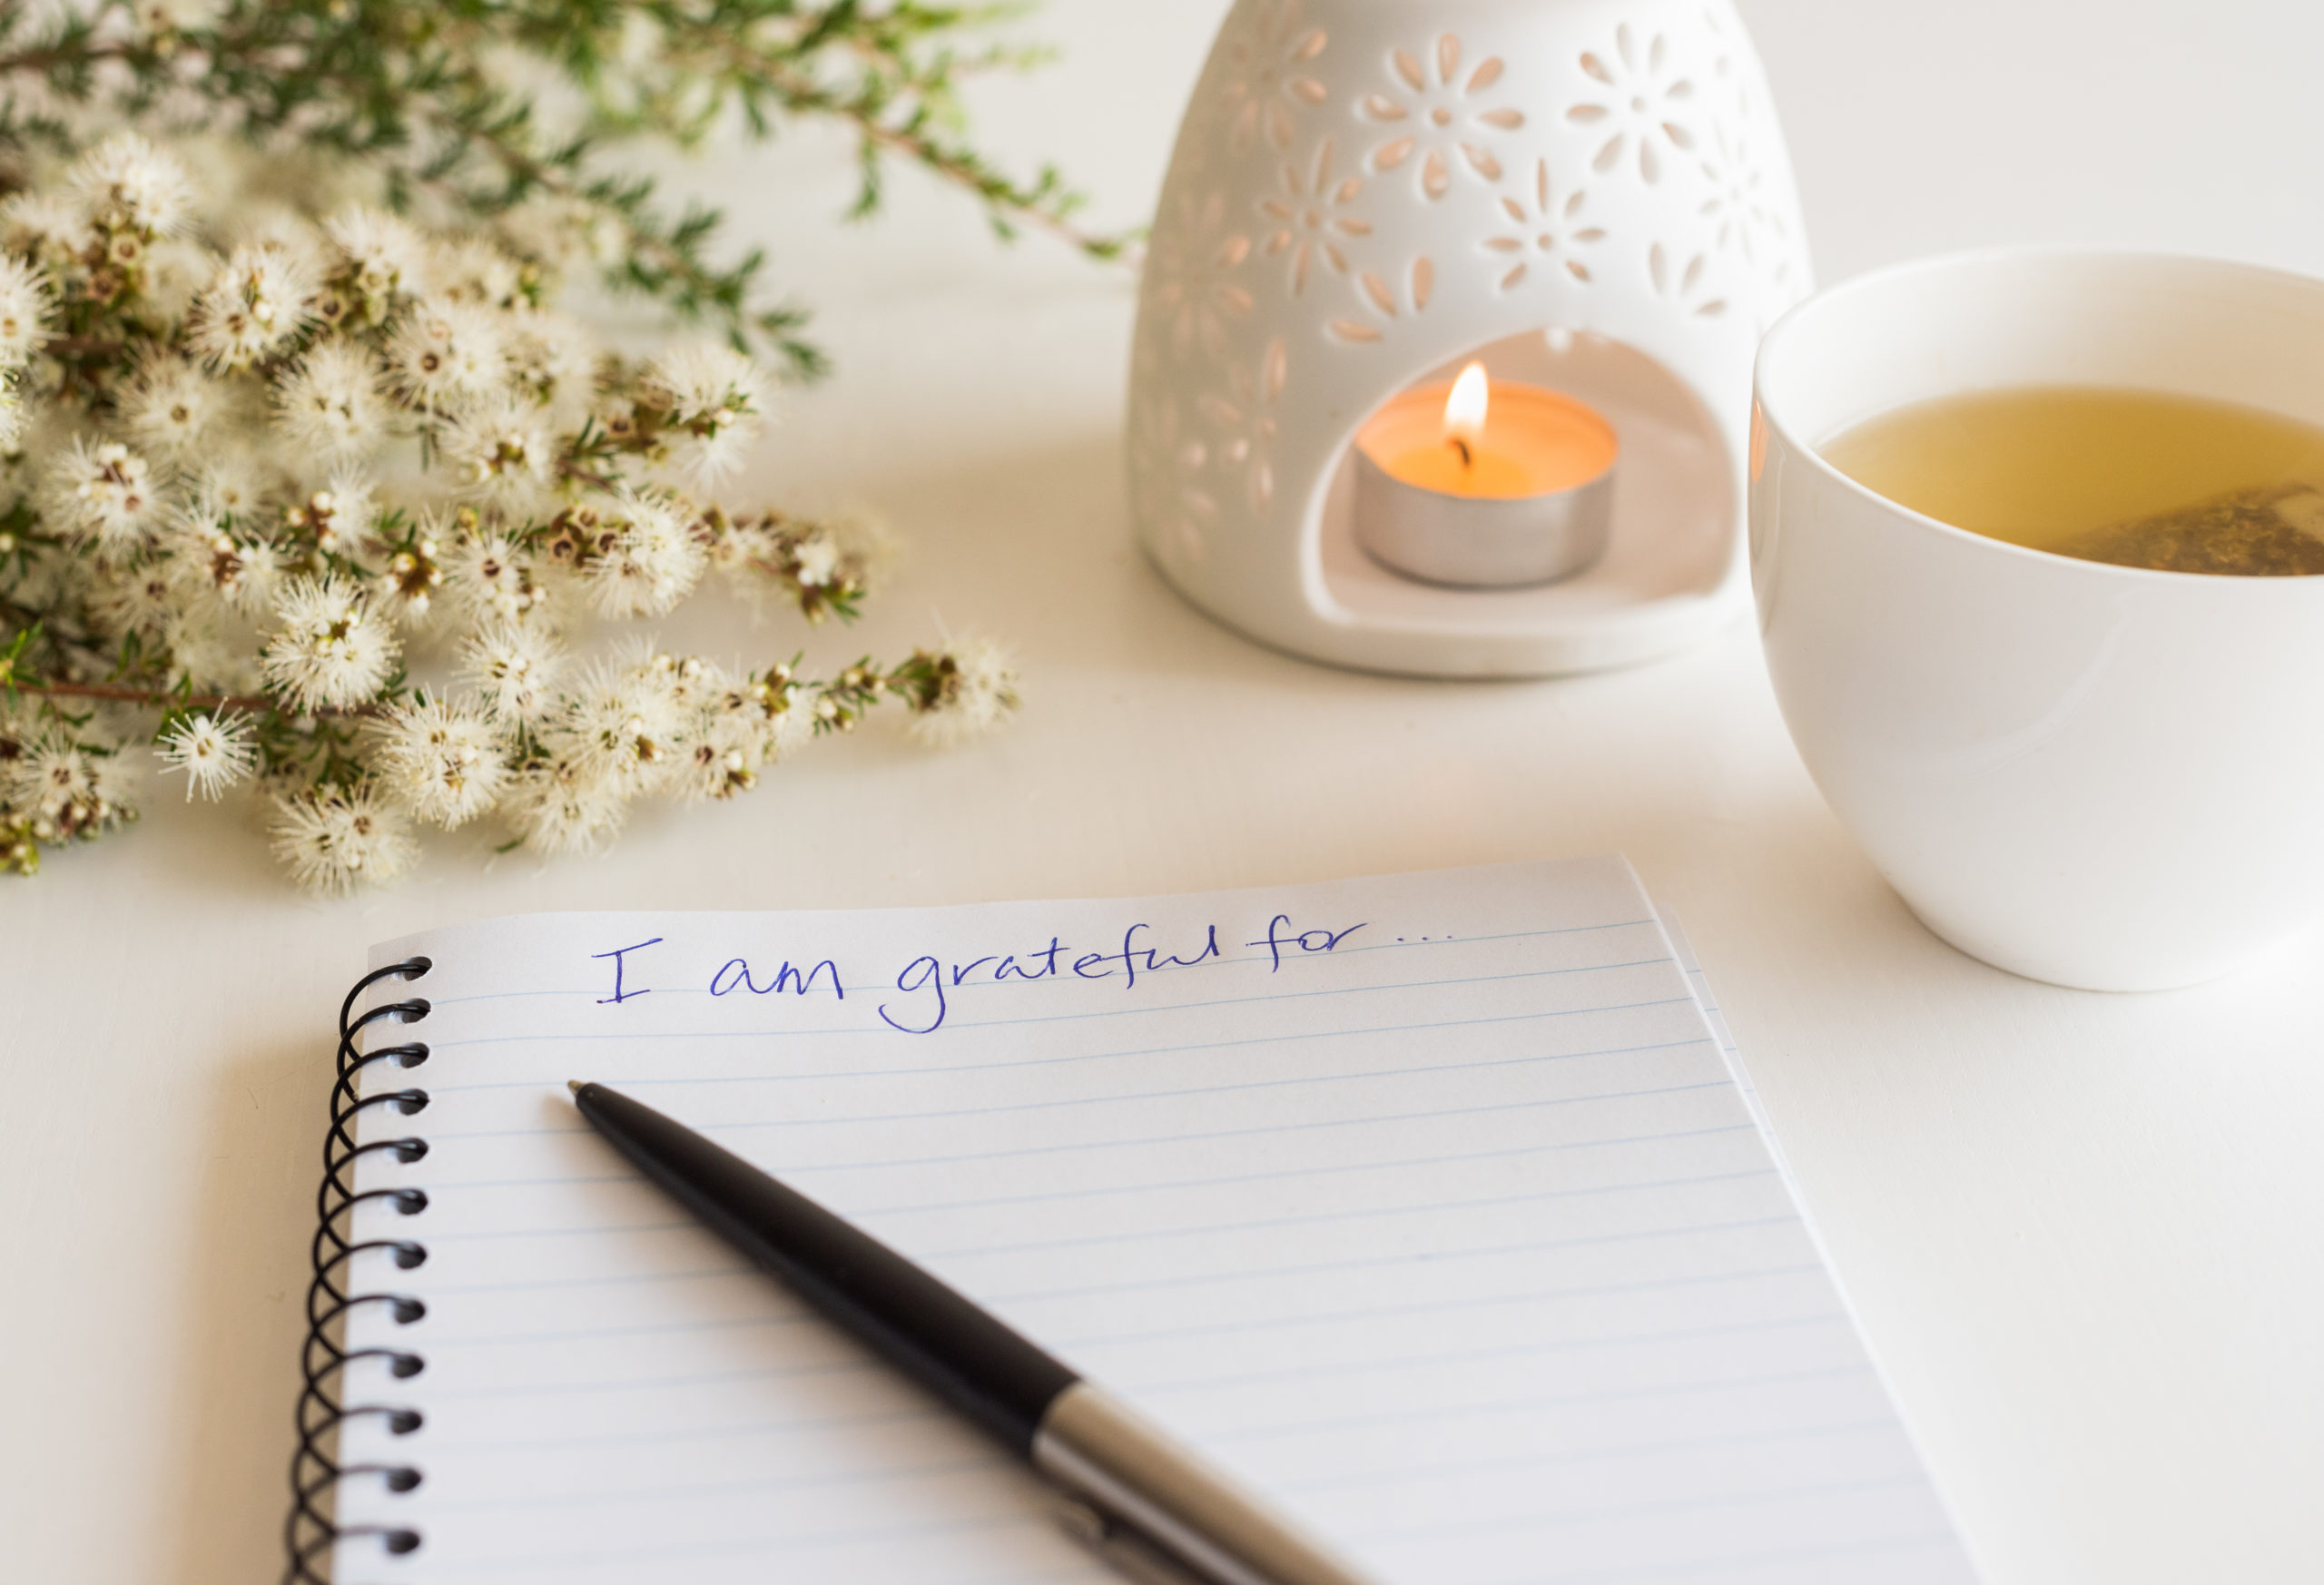 Close up of handwritten text "I am grateful for..." in foreground with notebook, pen,  cup of tea, flowers and oil burner in soft focus (deliberate angle)